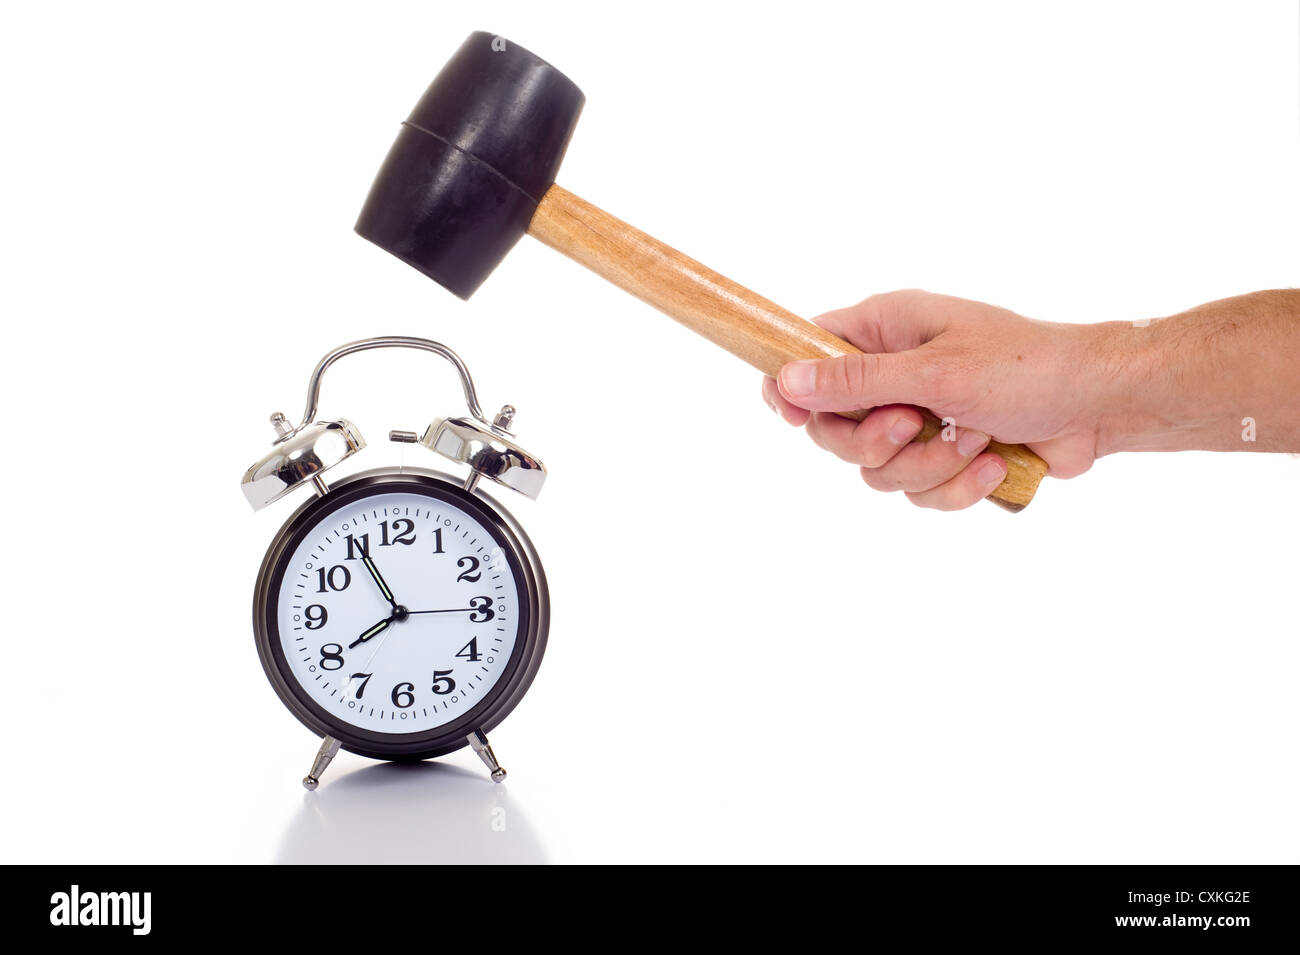 a hand holding a black mallet or hammer about to crush an old fashioned black alarm clock on a white background, time concept Stock Photo